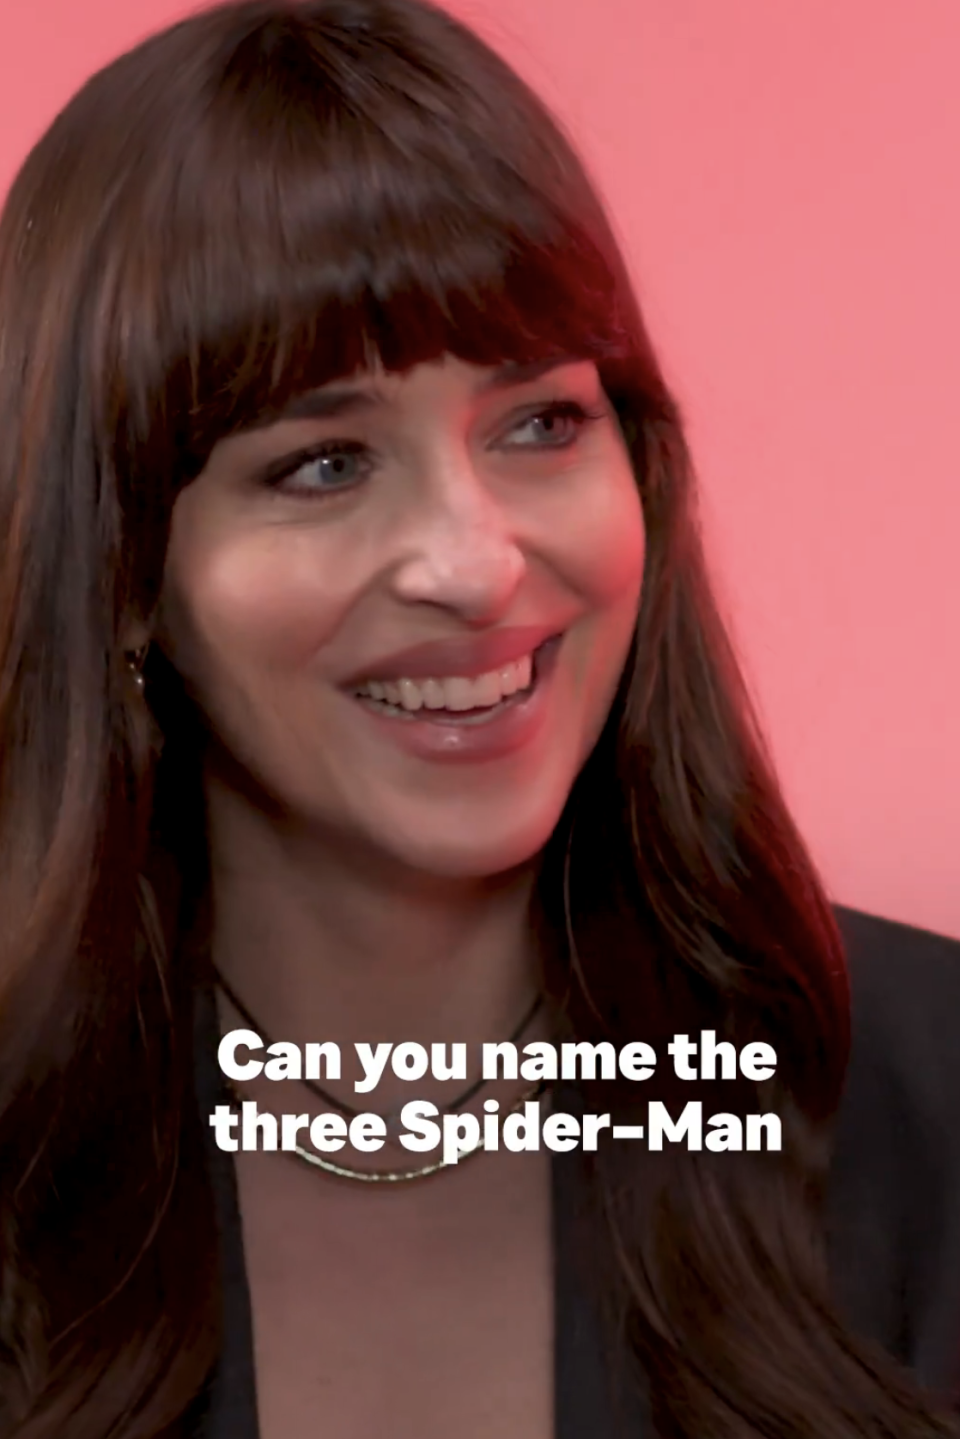 Dakota Johnson being asking if she can name the three Spider-Man movies Tom Holland stars in